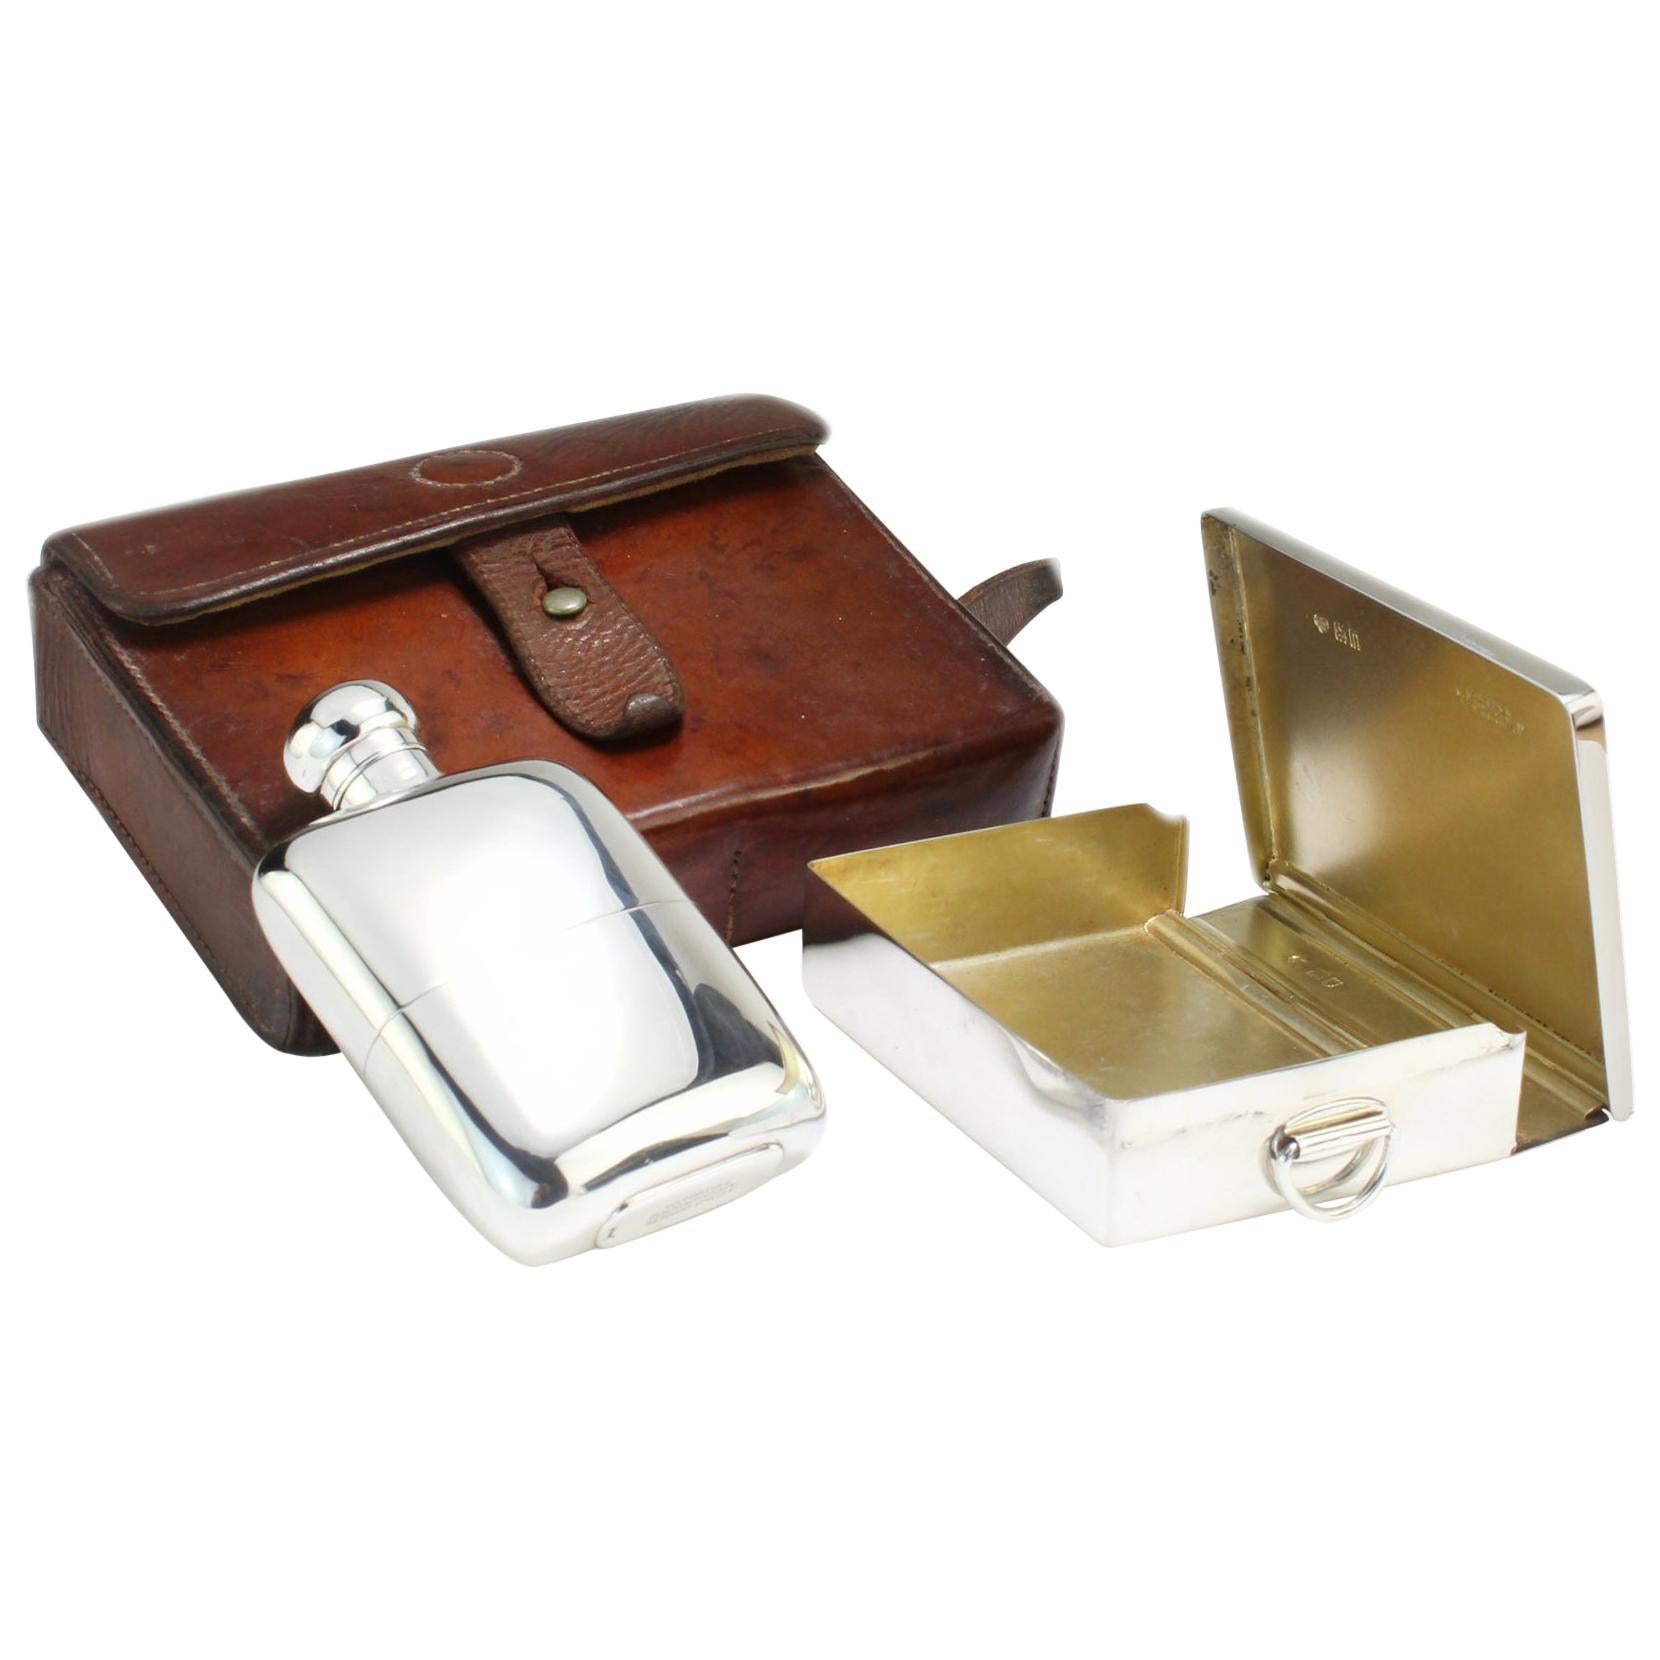 Edwardian Sterling Silver Set of Hip Flask and Sandwich Box in a Leather Case